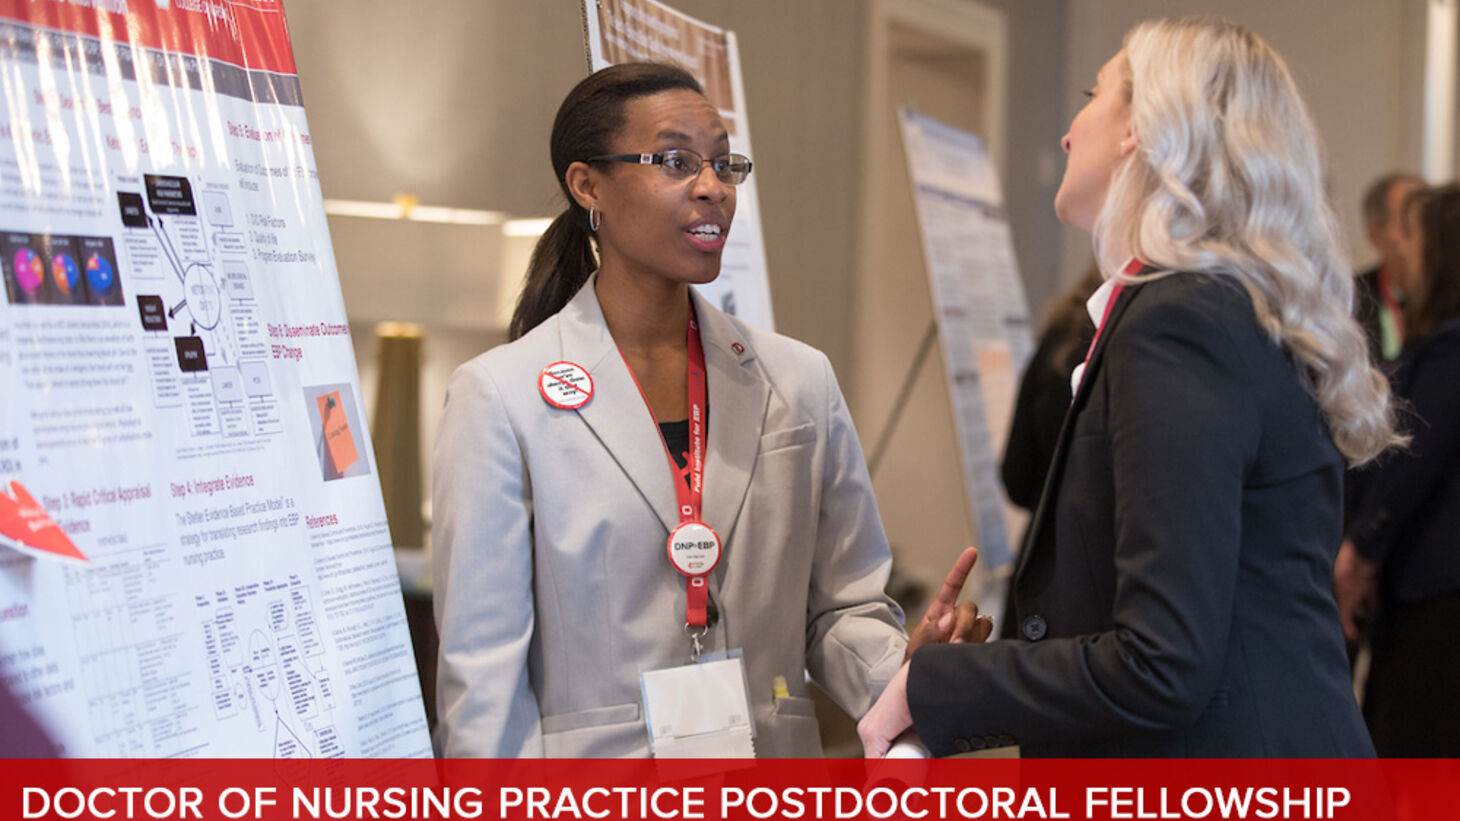 DOCTOR OF NURSING PRACTICE (DNP) POSTDOCTORAL FELLOWSHIPCategory icon